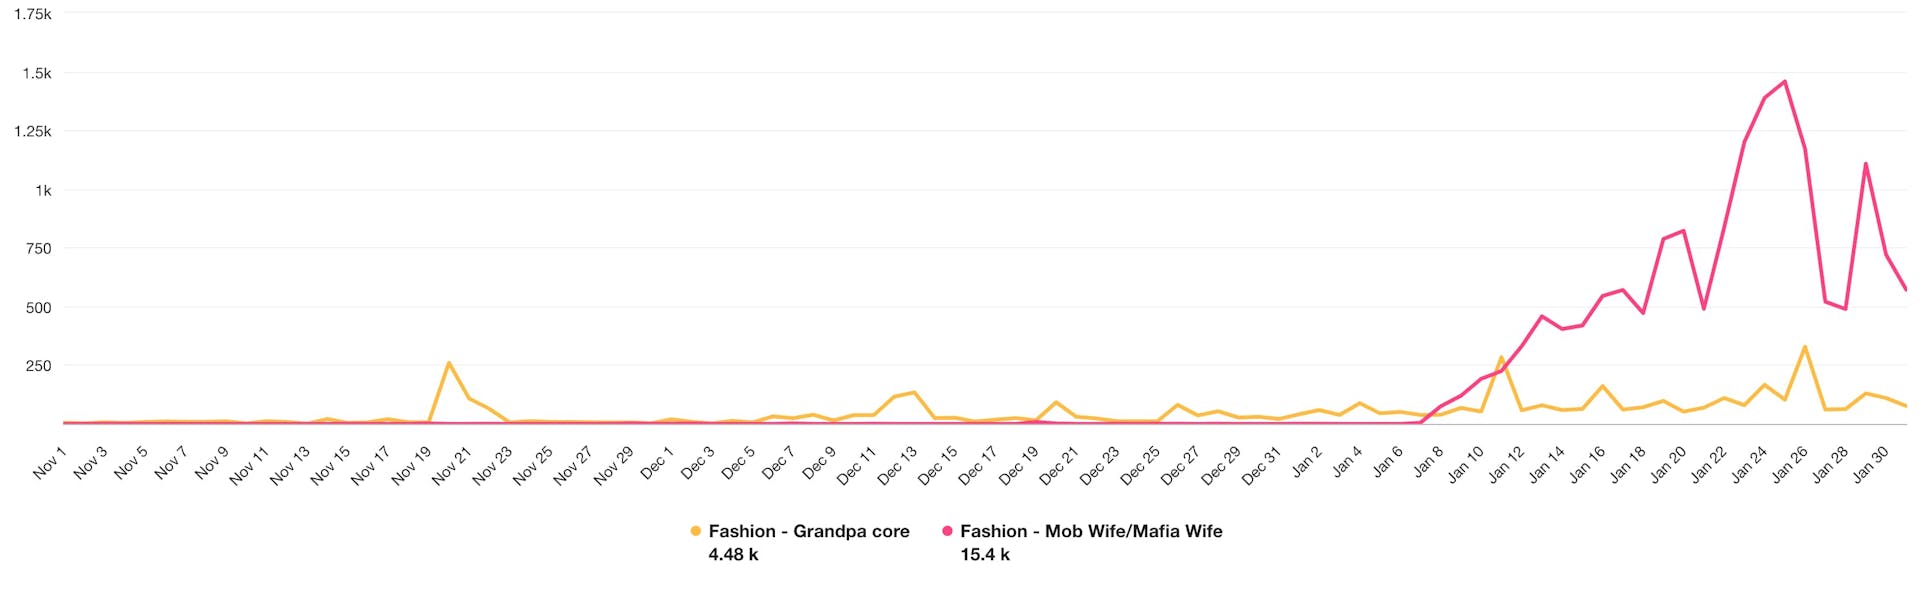 A chart comparing the volumes of mentions of the grandpacore and mob wife trends. The chart shows that throughout January, the mob wife aesthetic was mentioned many more times than grandpacore.